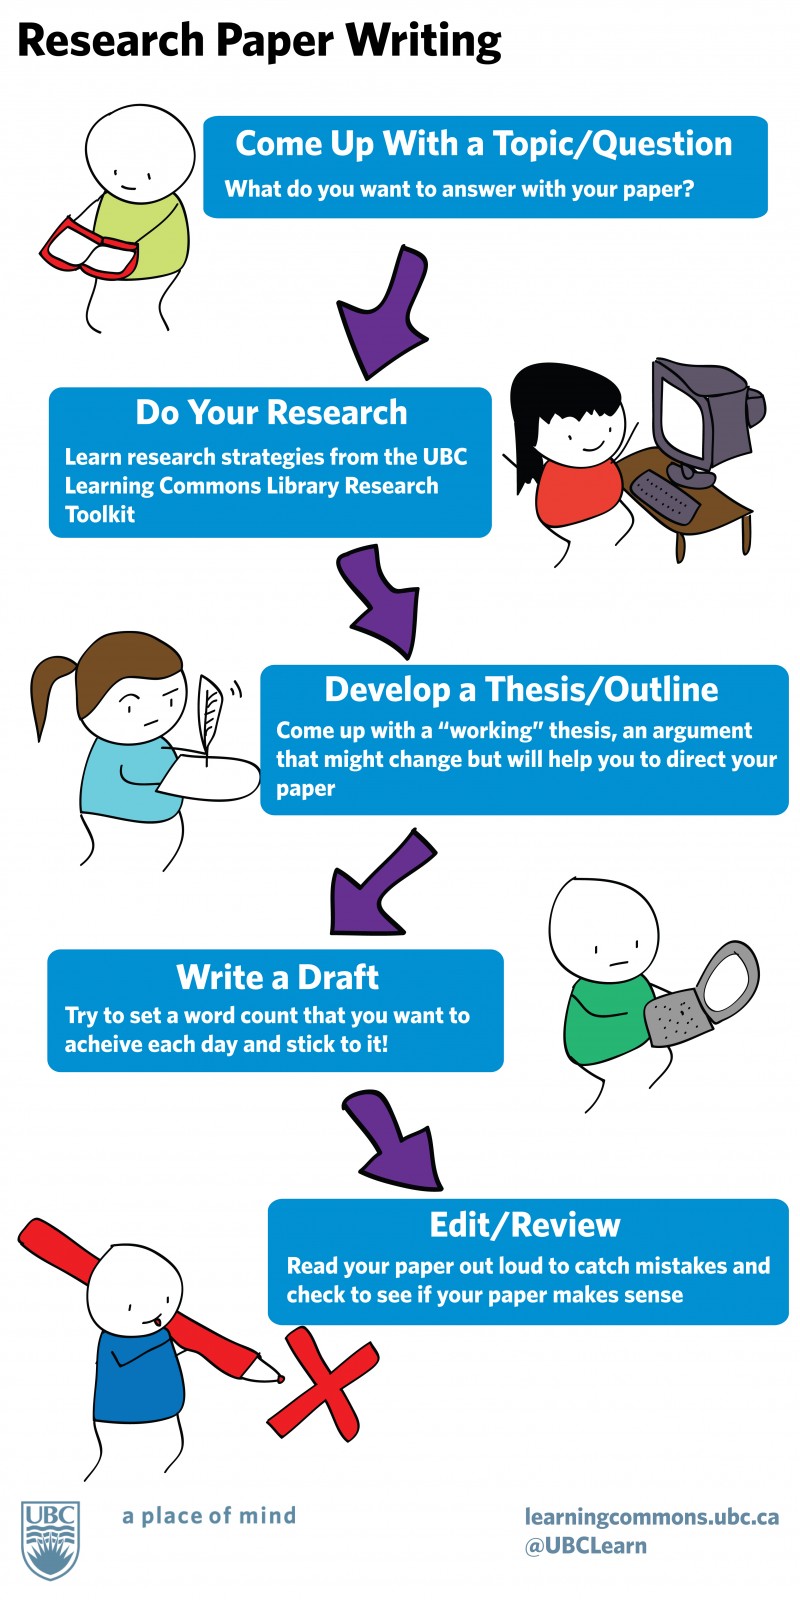 Flowchart illustrated with cartoon figures. Title: Research Paper Writing. First step: Come up with a topic/question. What do you want to answer with your paper? Next, Do your research. Learn research strategies from the UBC Learning Commons Library Research Toolkit. Next, Develop a thesis/outline. Come up with a 